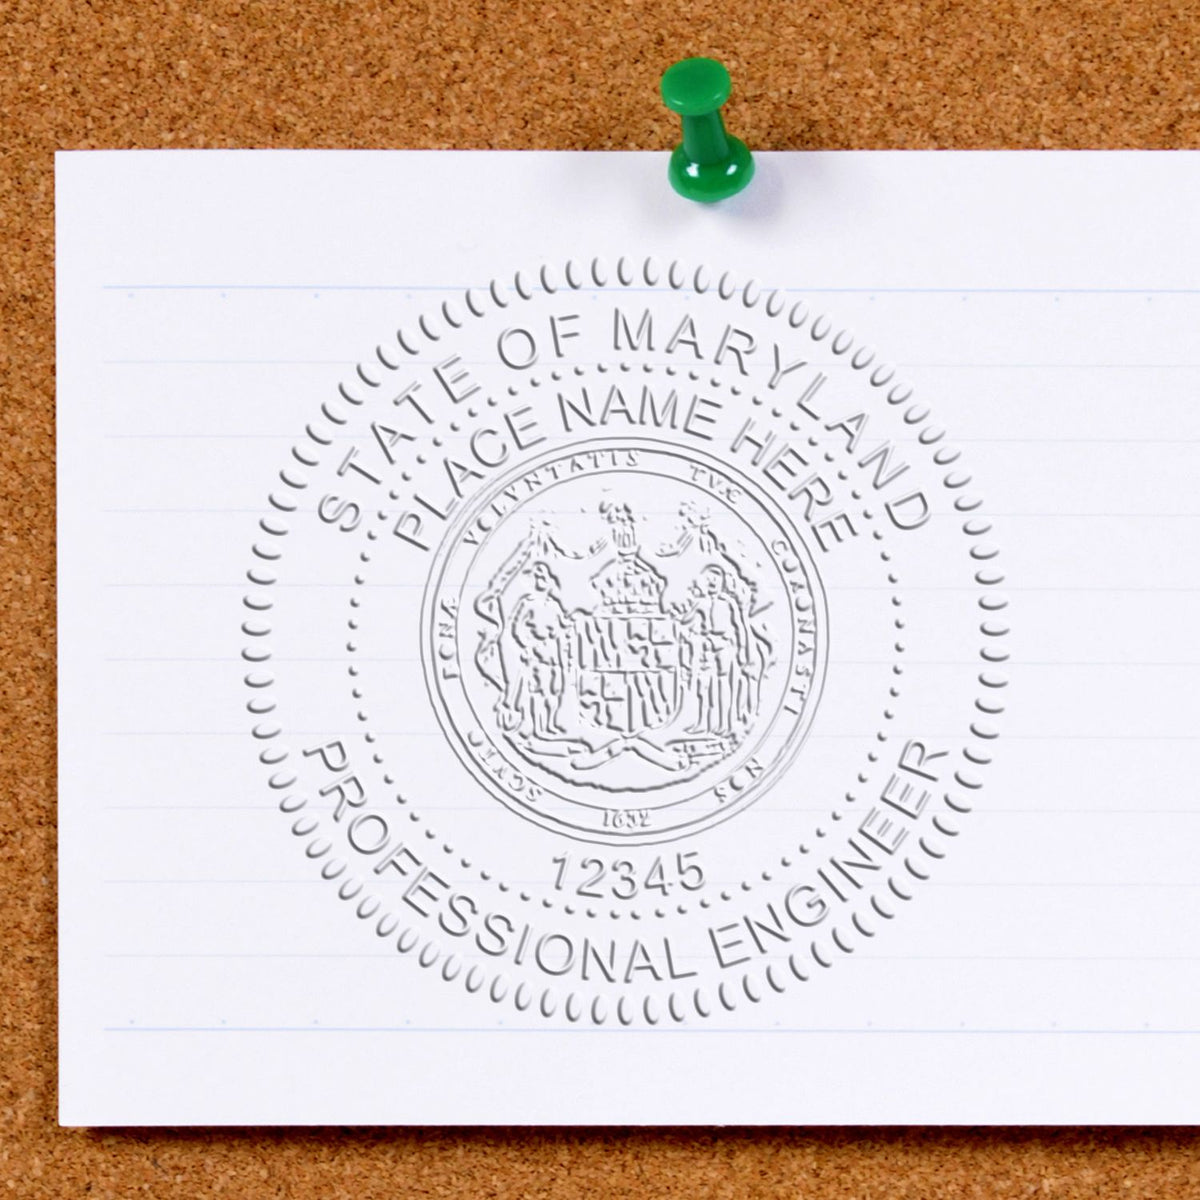 An alternative view of the Hybrid Maryland Engineer Seal stamped on a sheet of paper showing the image in use